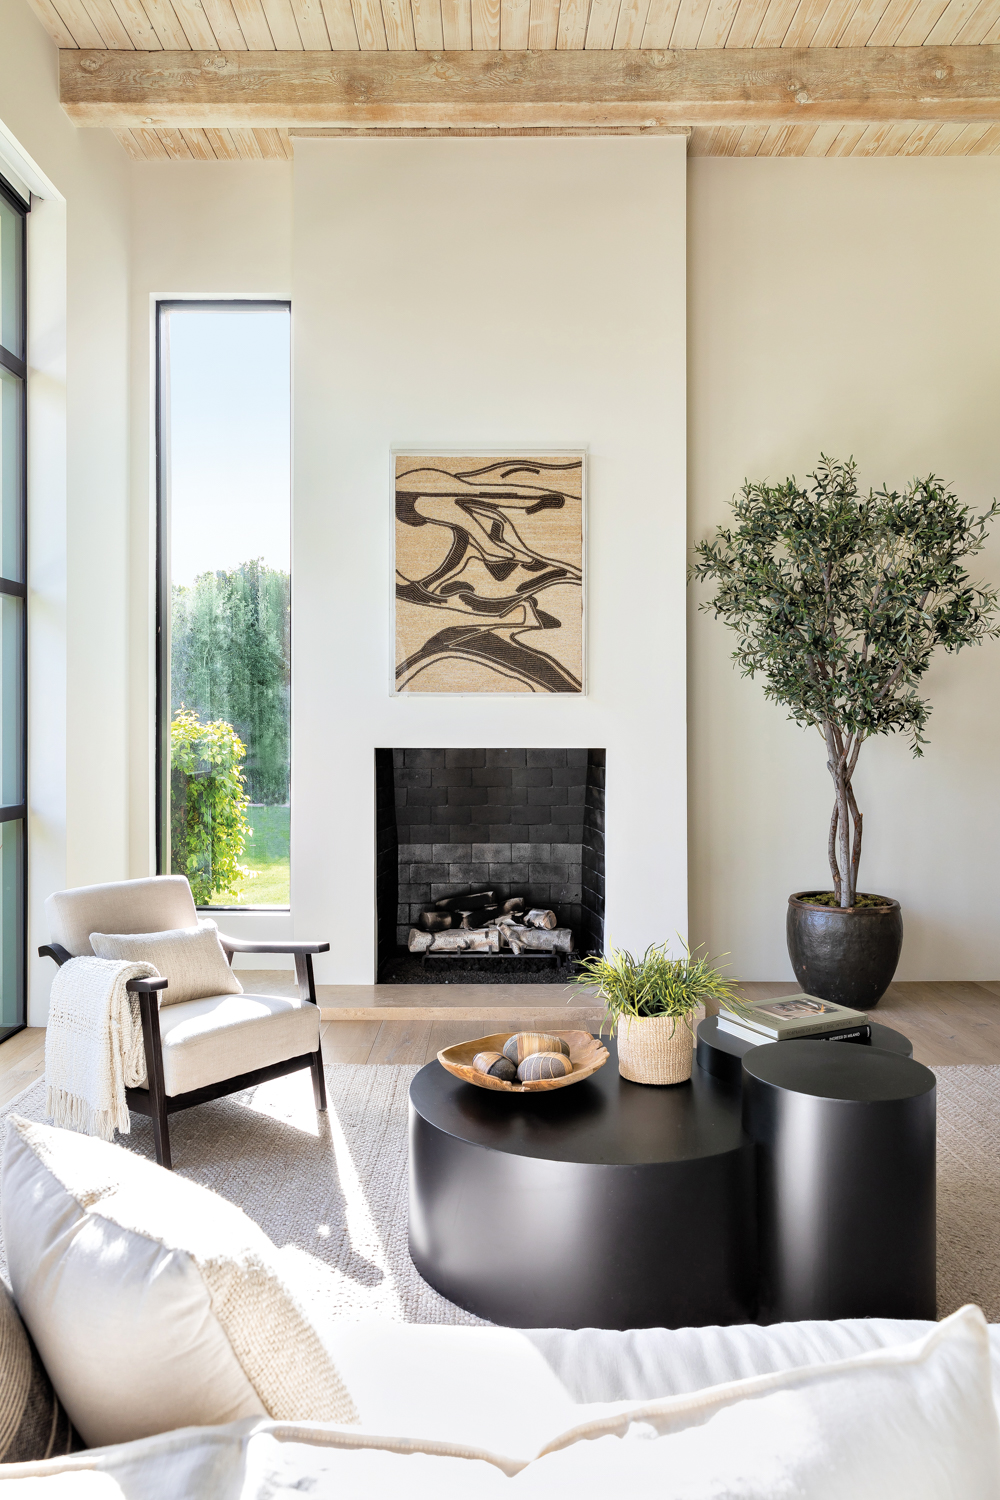 living room with black sculptural coffee table, white armchair and fireplace with abstract artwork above